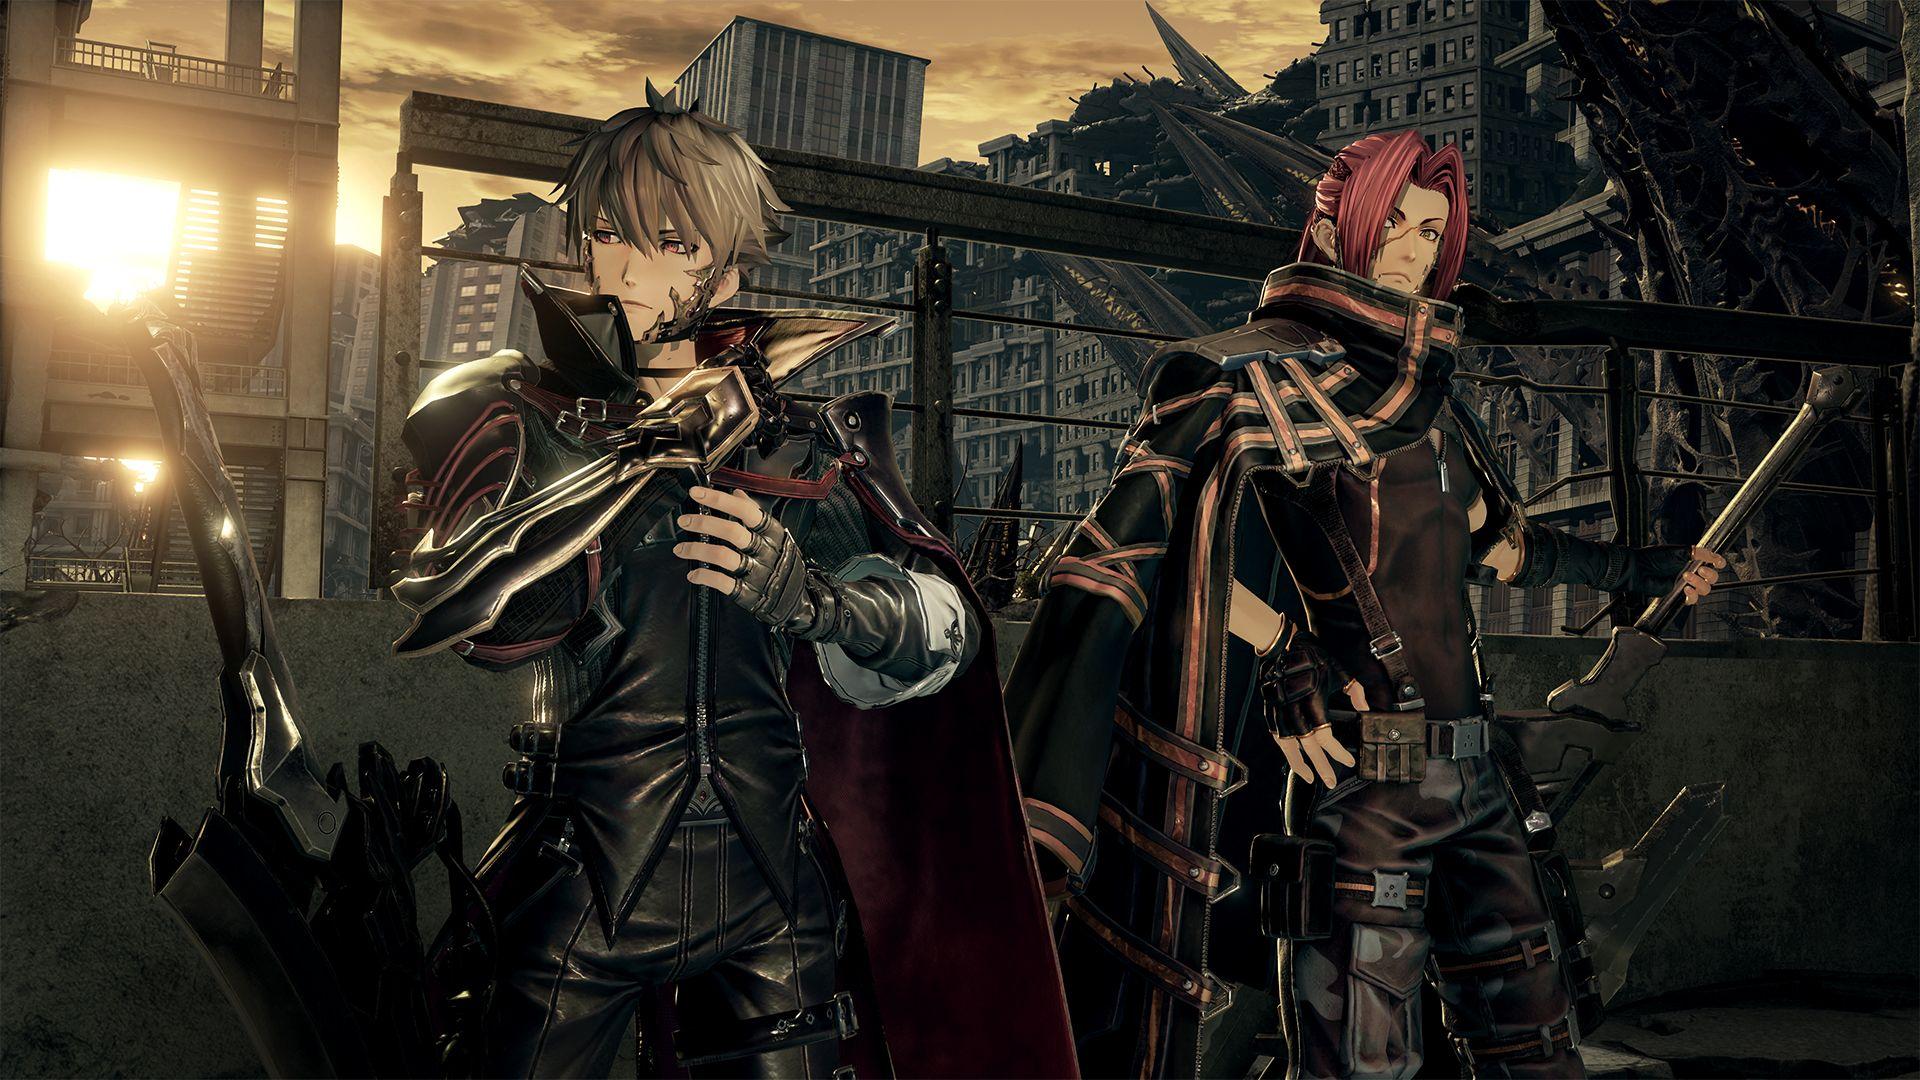 See the first screenshots from Code Vein, Bandai Namco's new